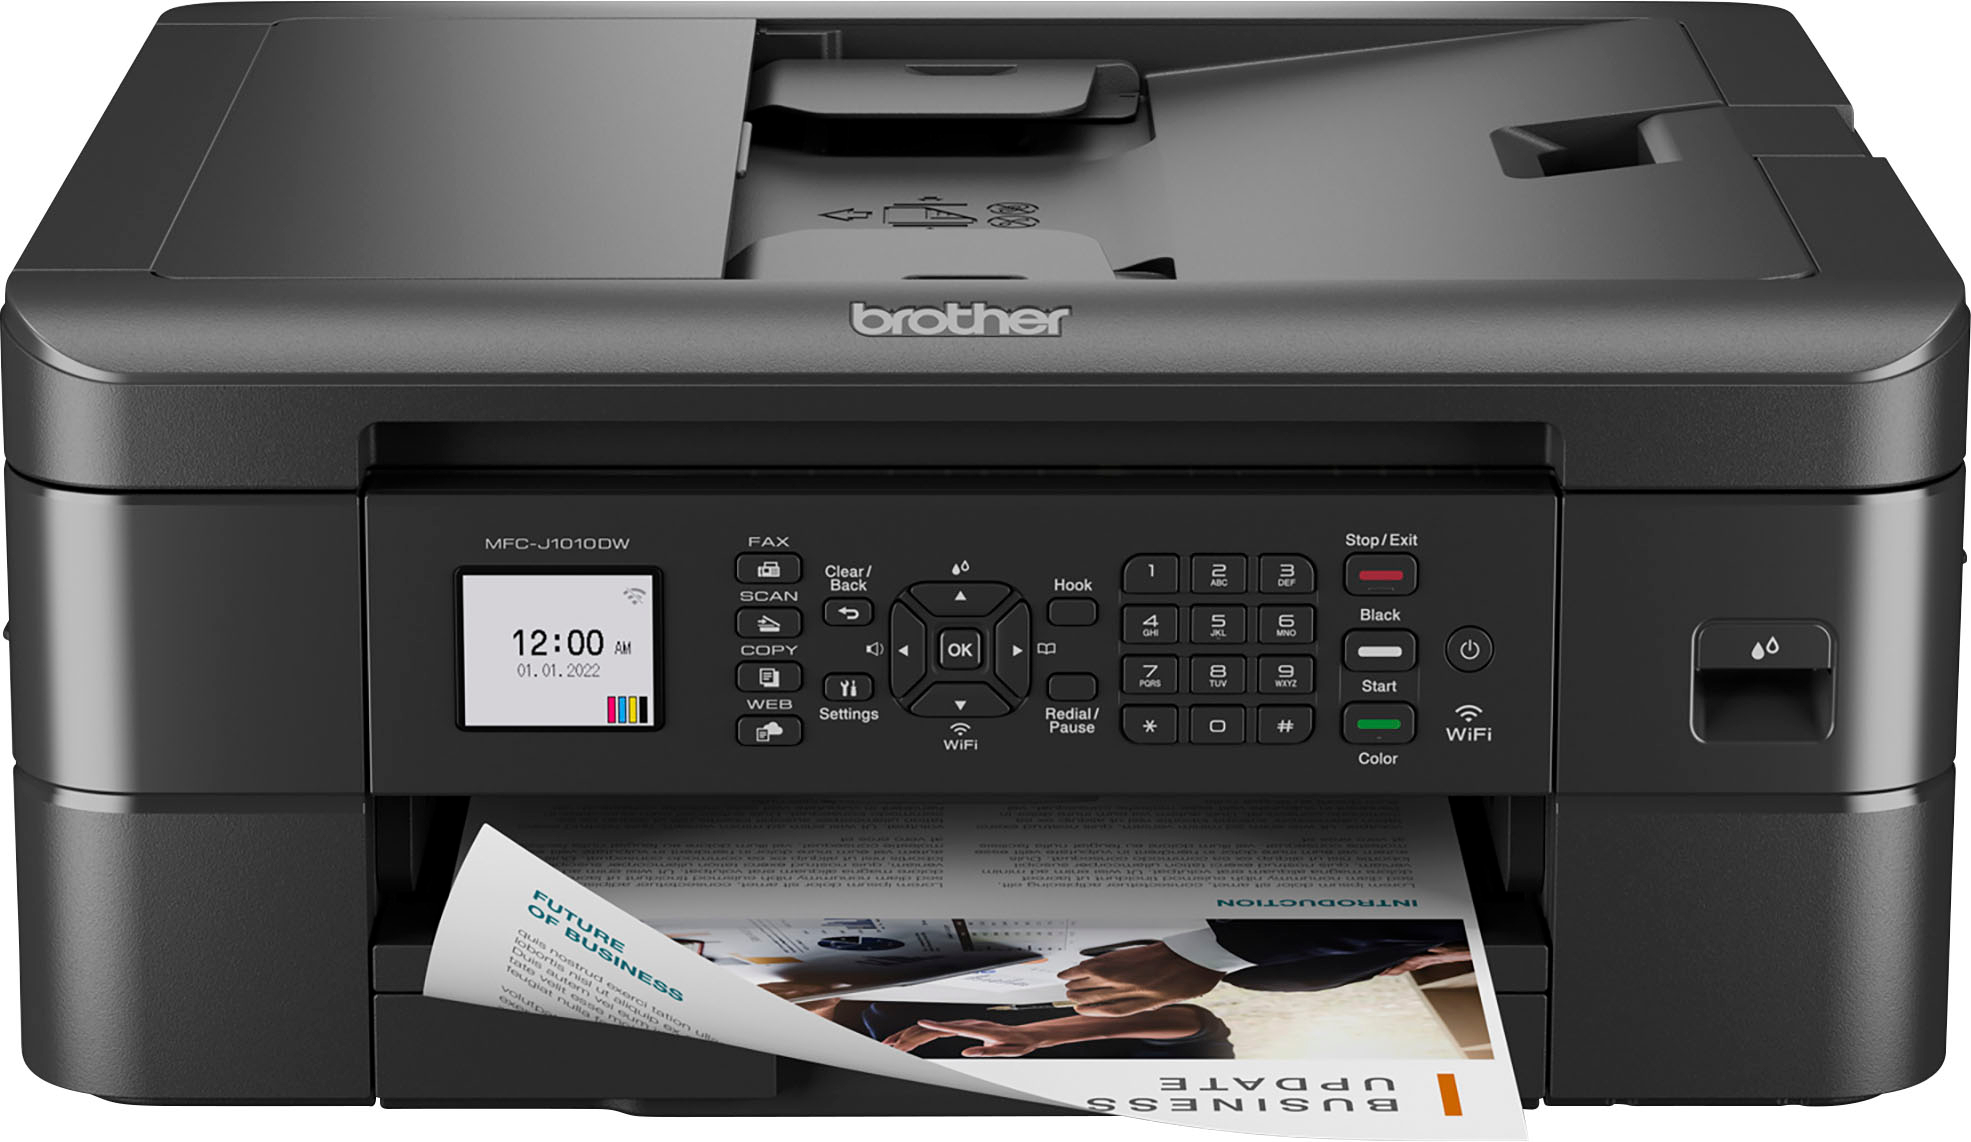 MFC-J1010DW Wireless Color All-in-One Refresh Subscription Eligible Inkjet Printer Black - Best